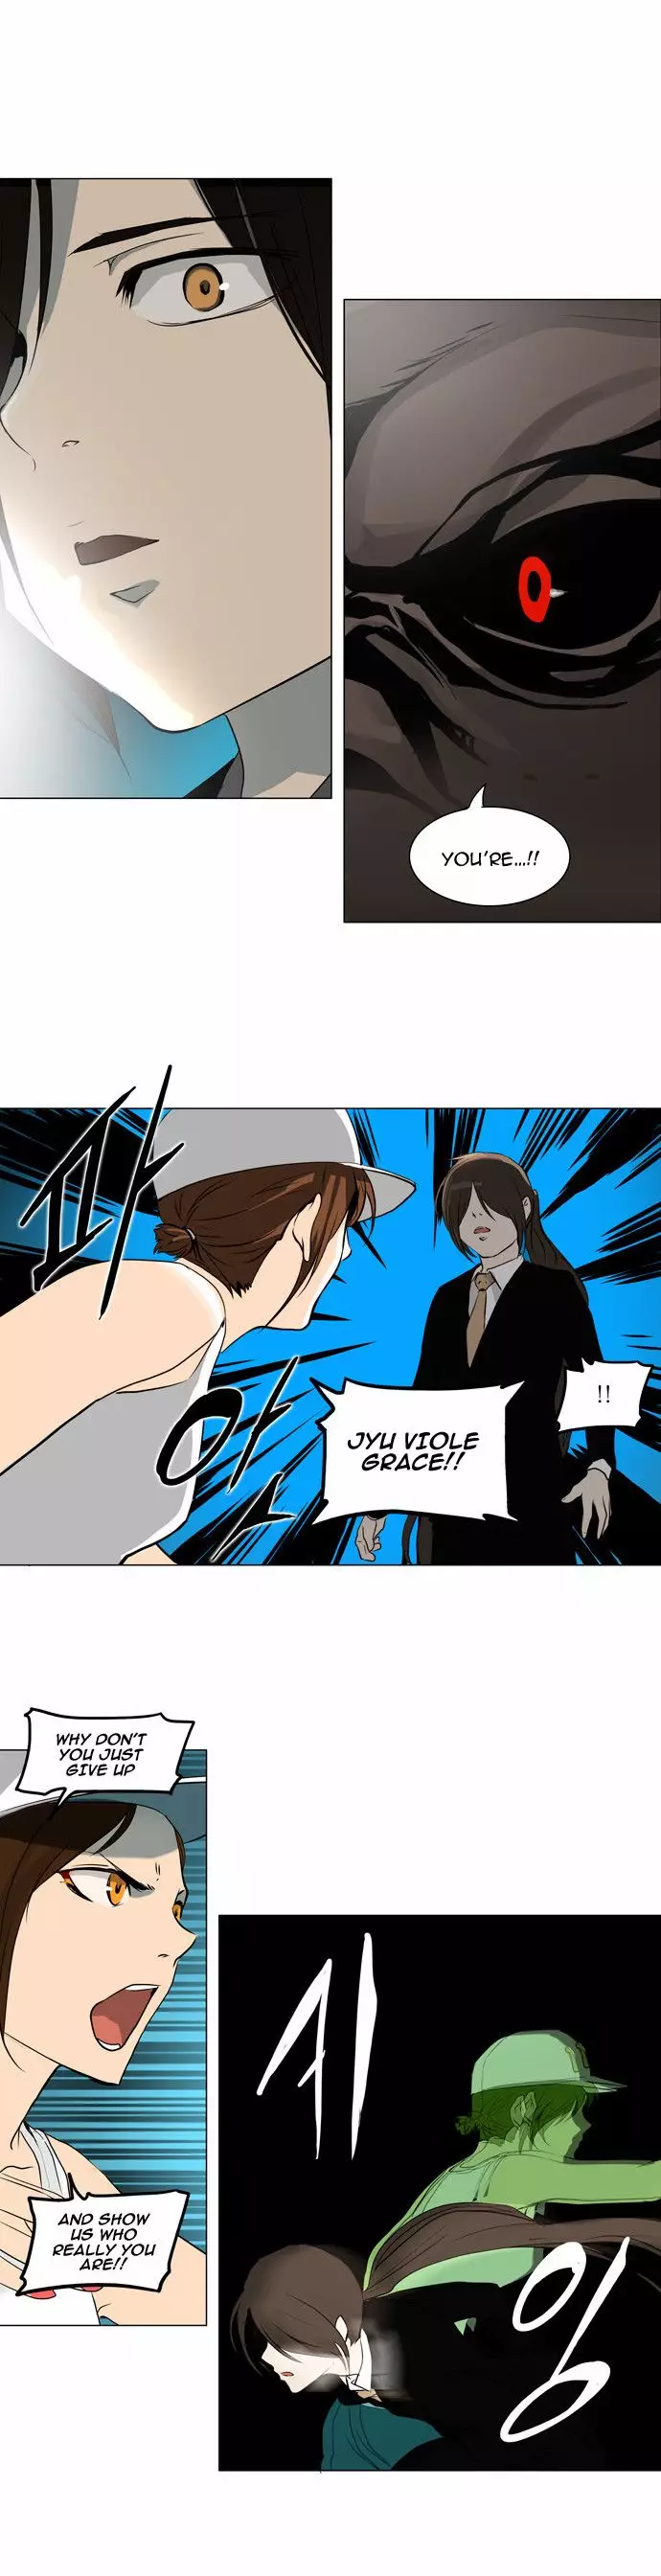 Tower of God - 160 page p_00003